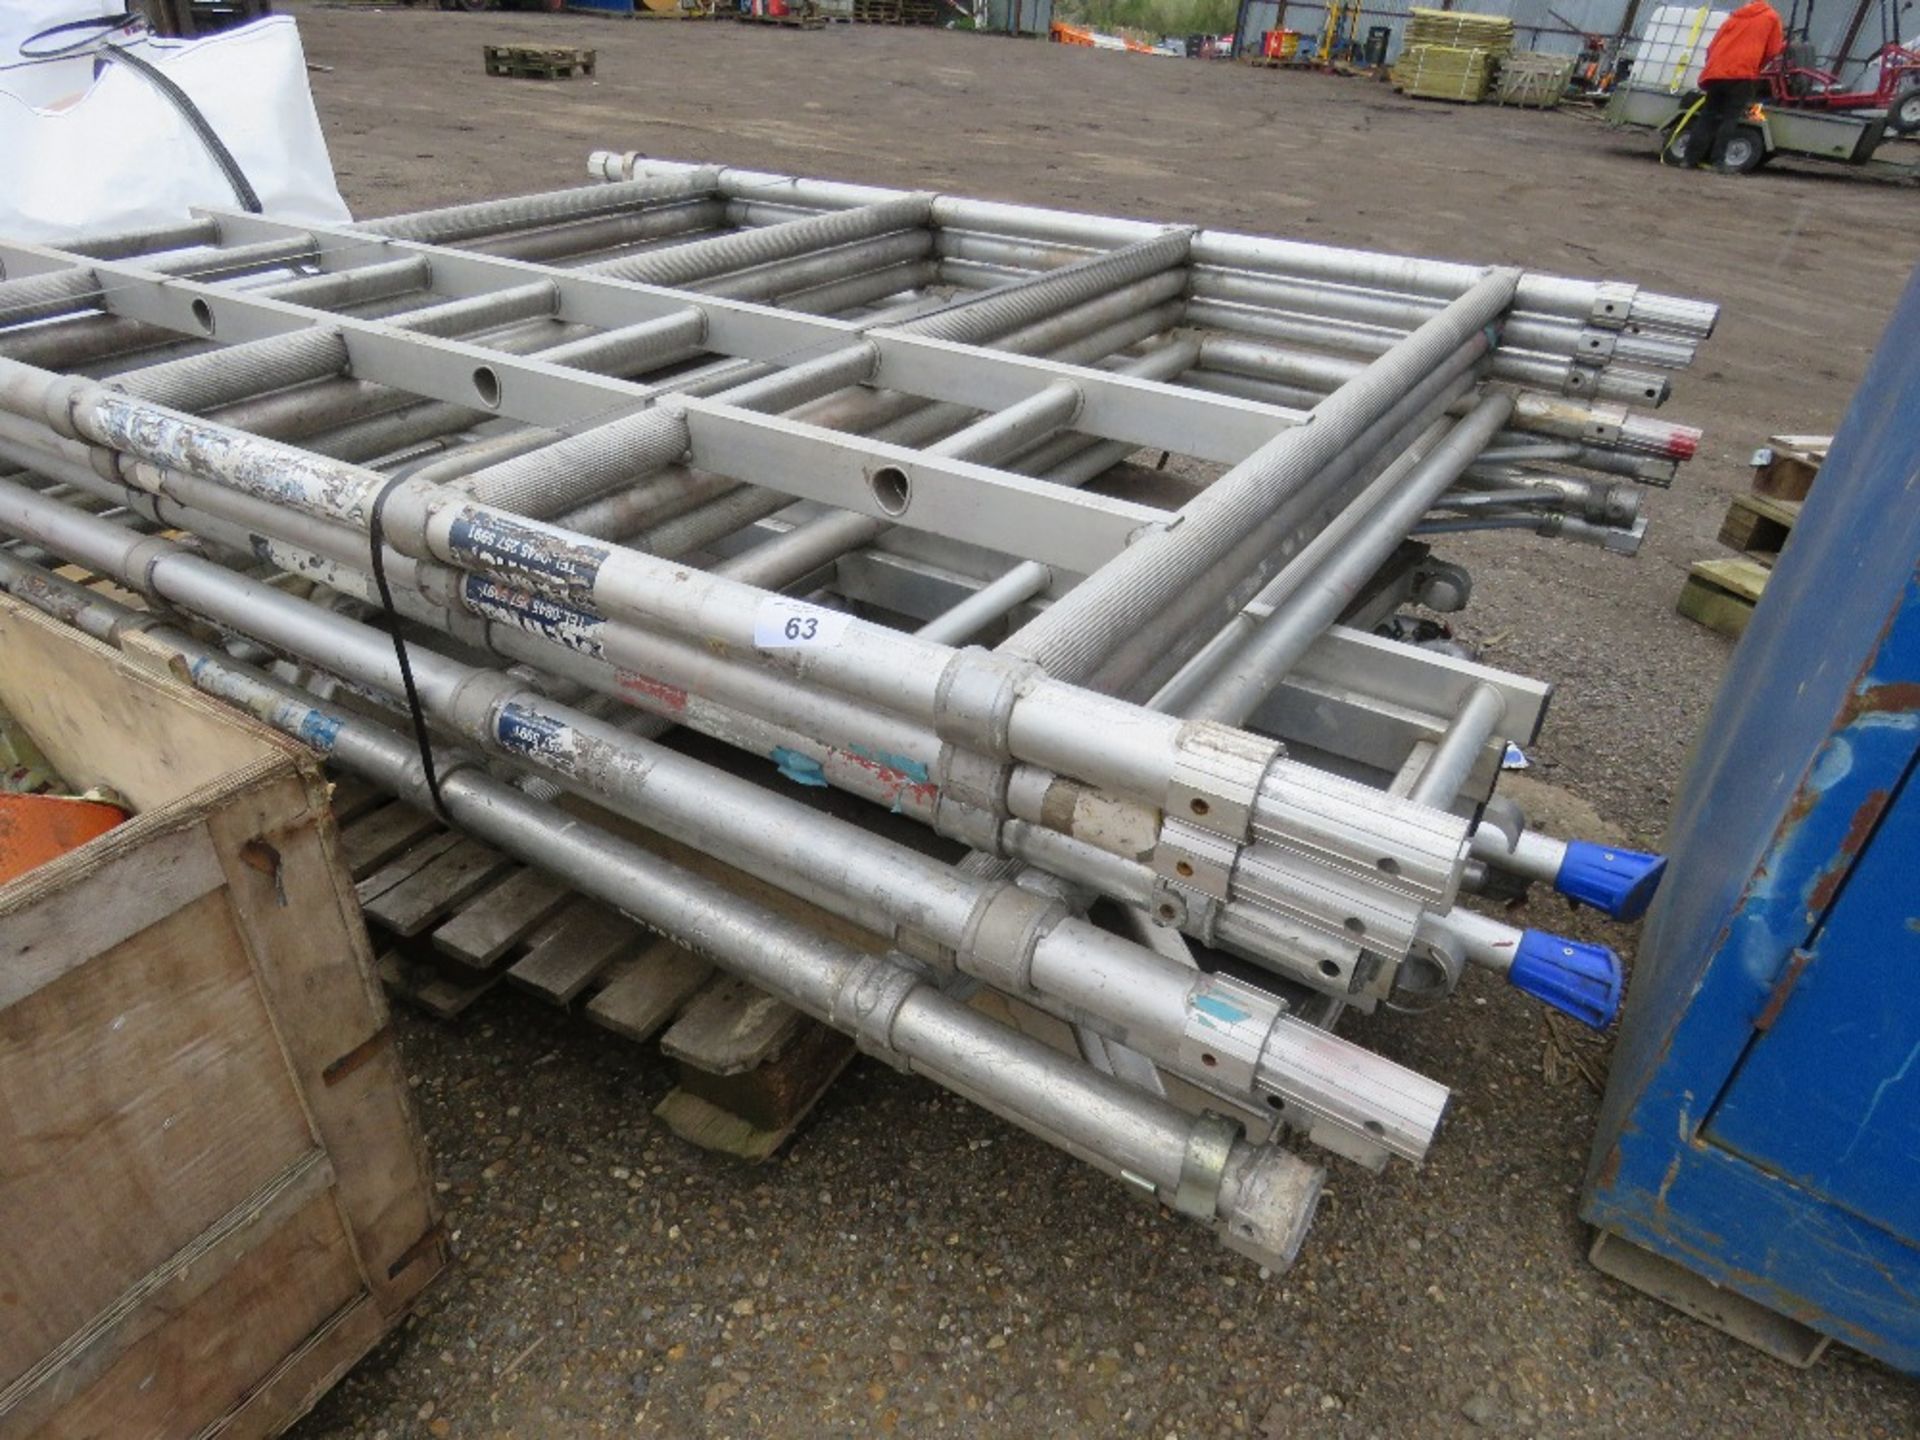 LEWIS ALUMINIUM SCAFFOLD TOWER PARTS INCLUDING FRAMES, BEAMS, LEGS AND BOARDS.